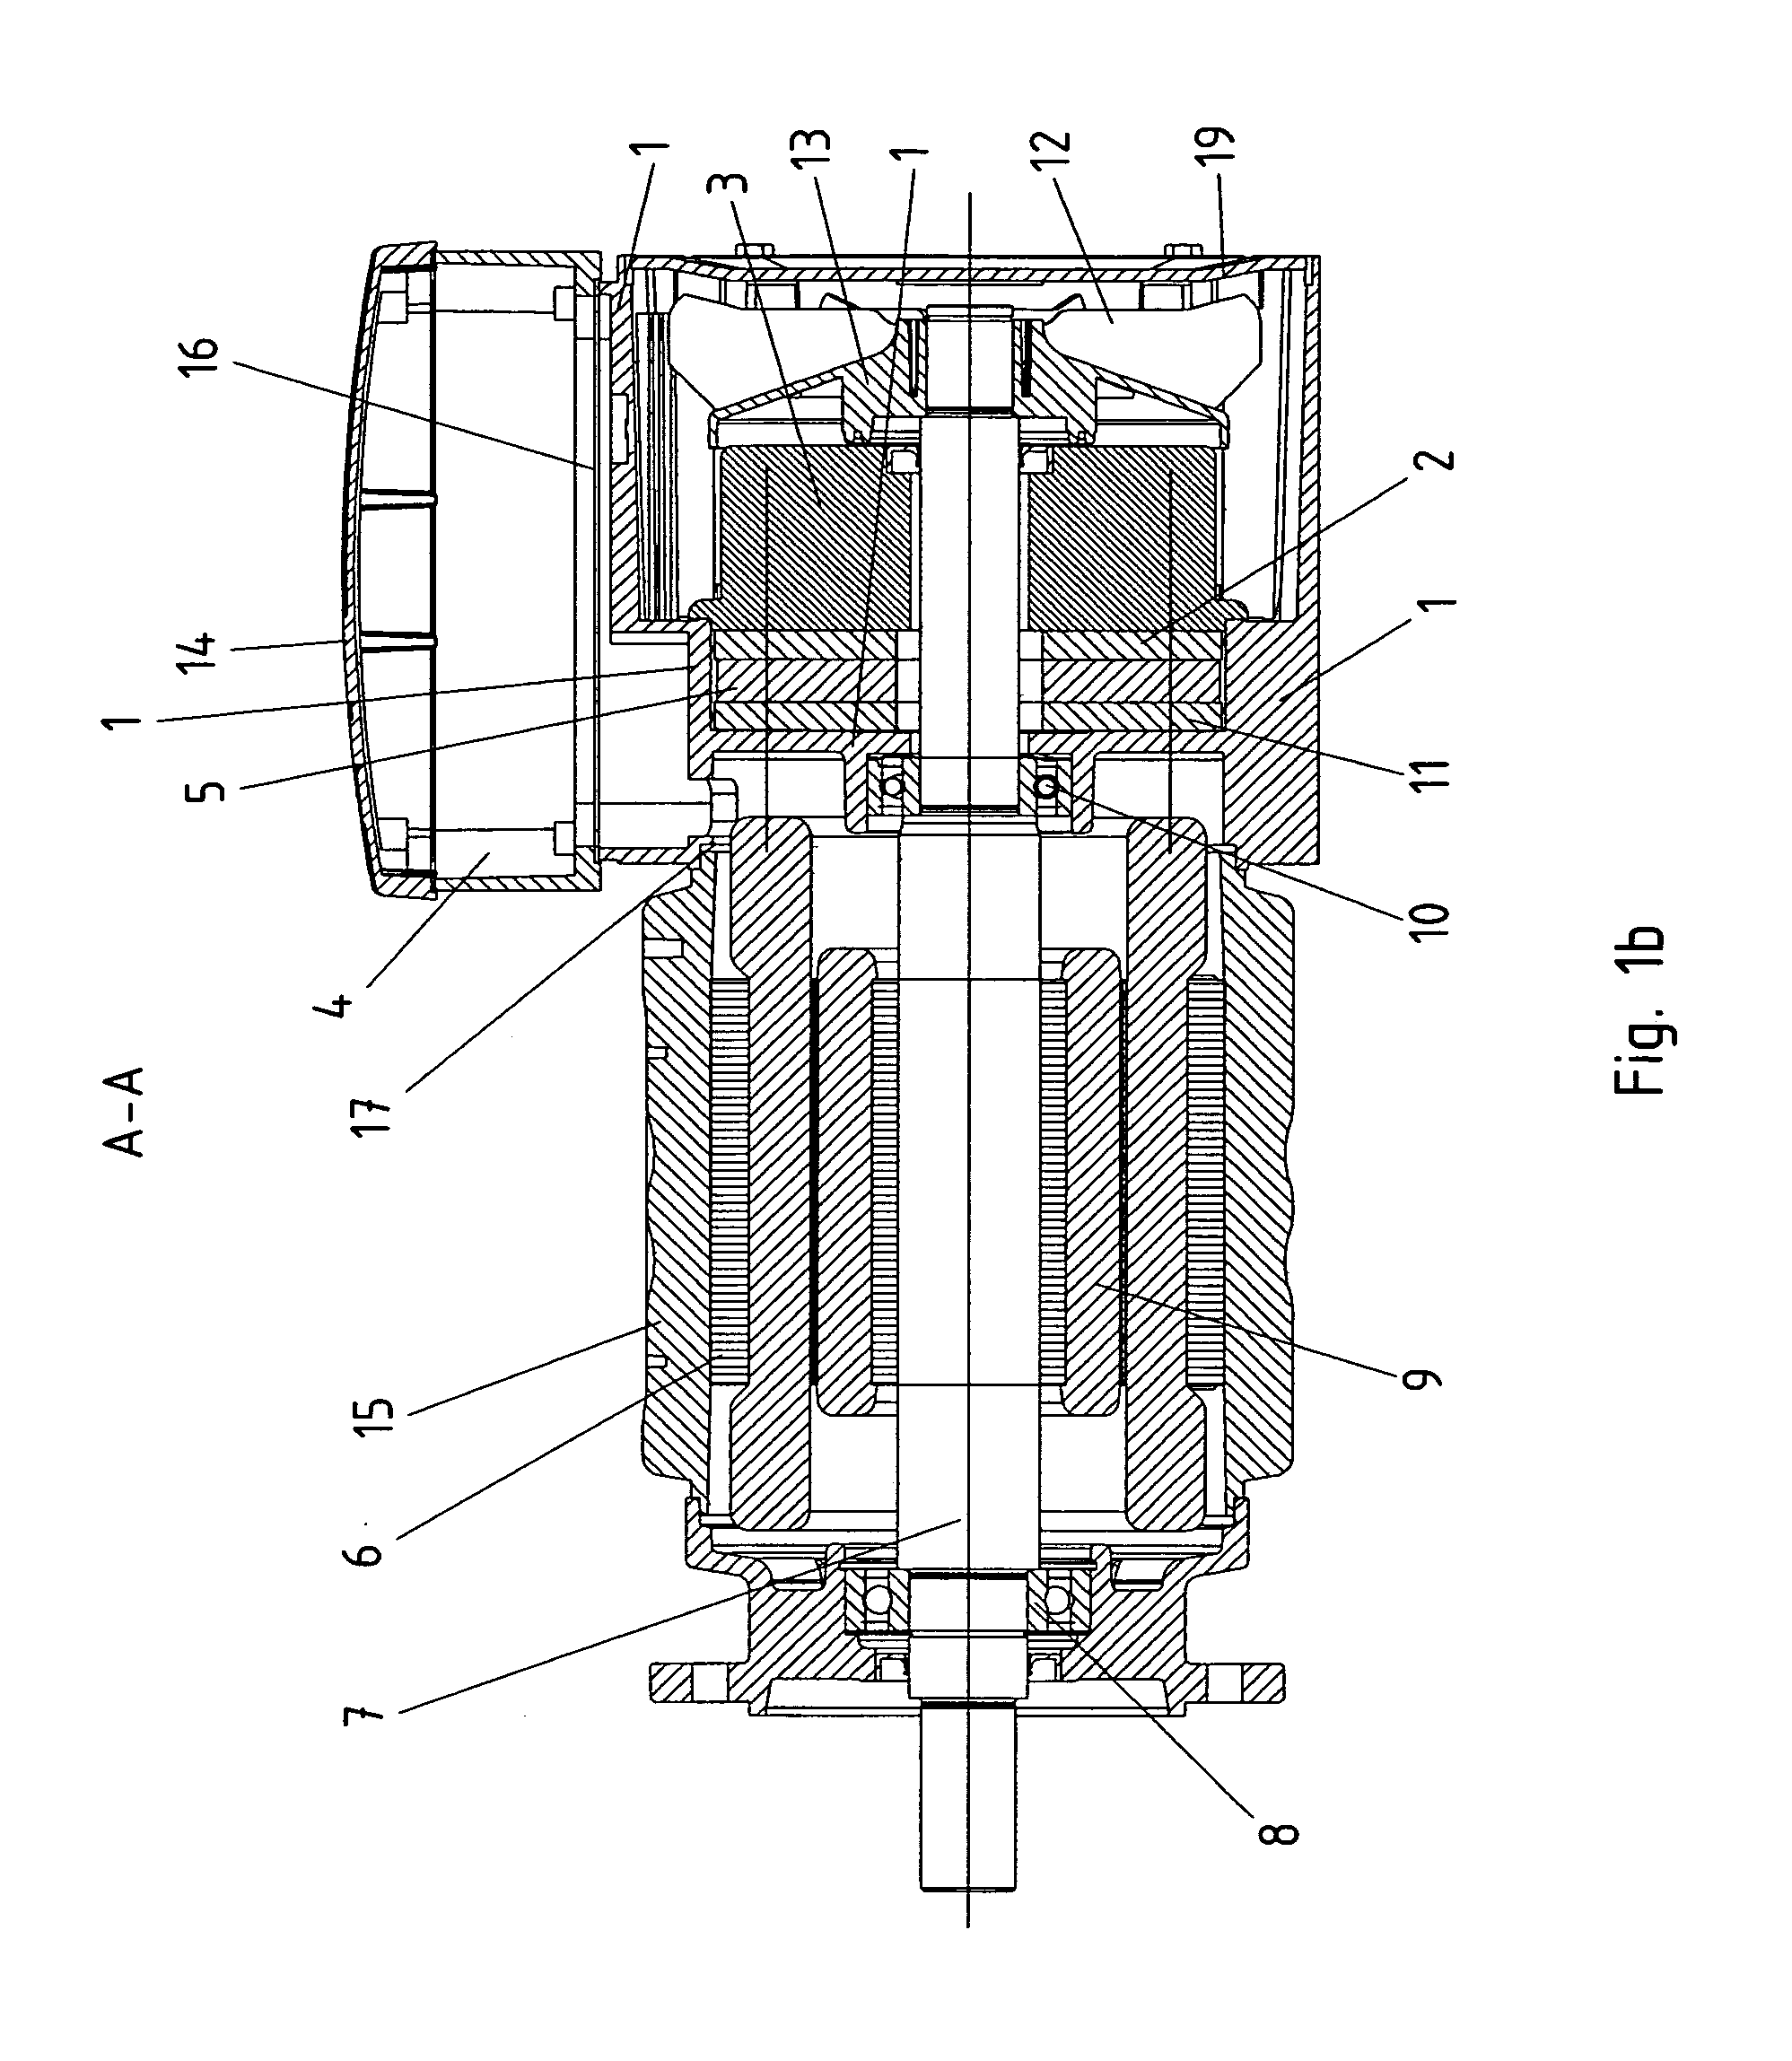 Electric Motor And Series Of Electric Motors